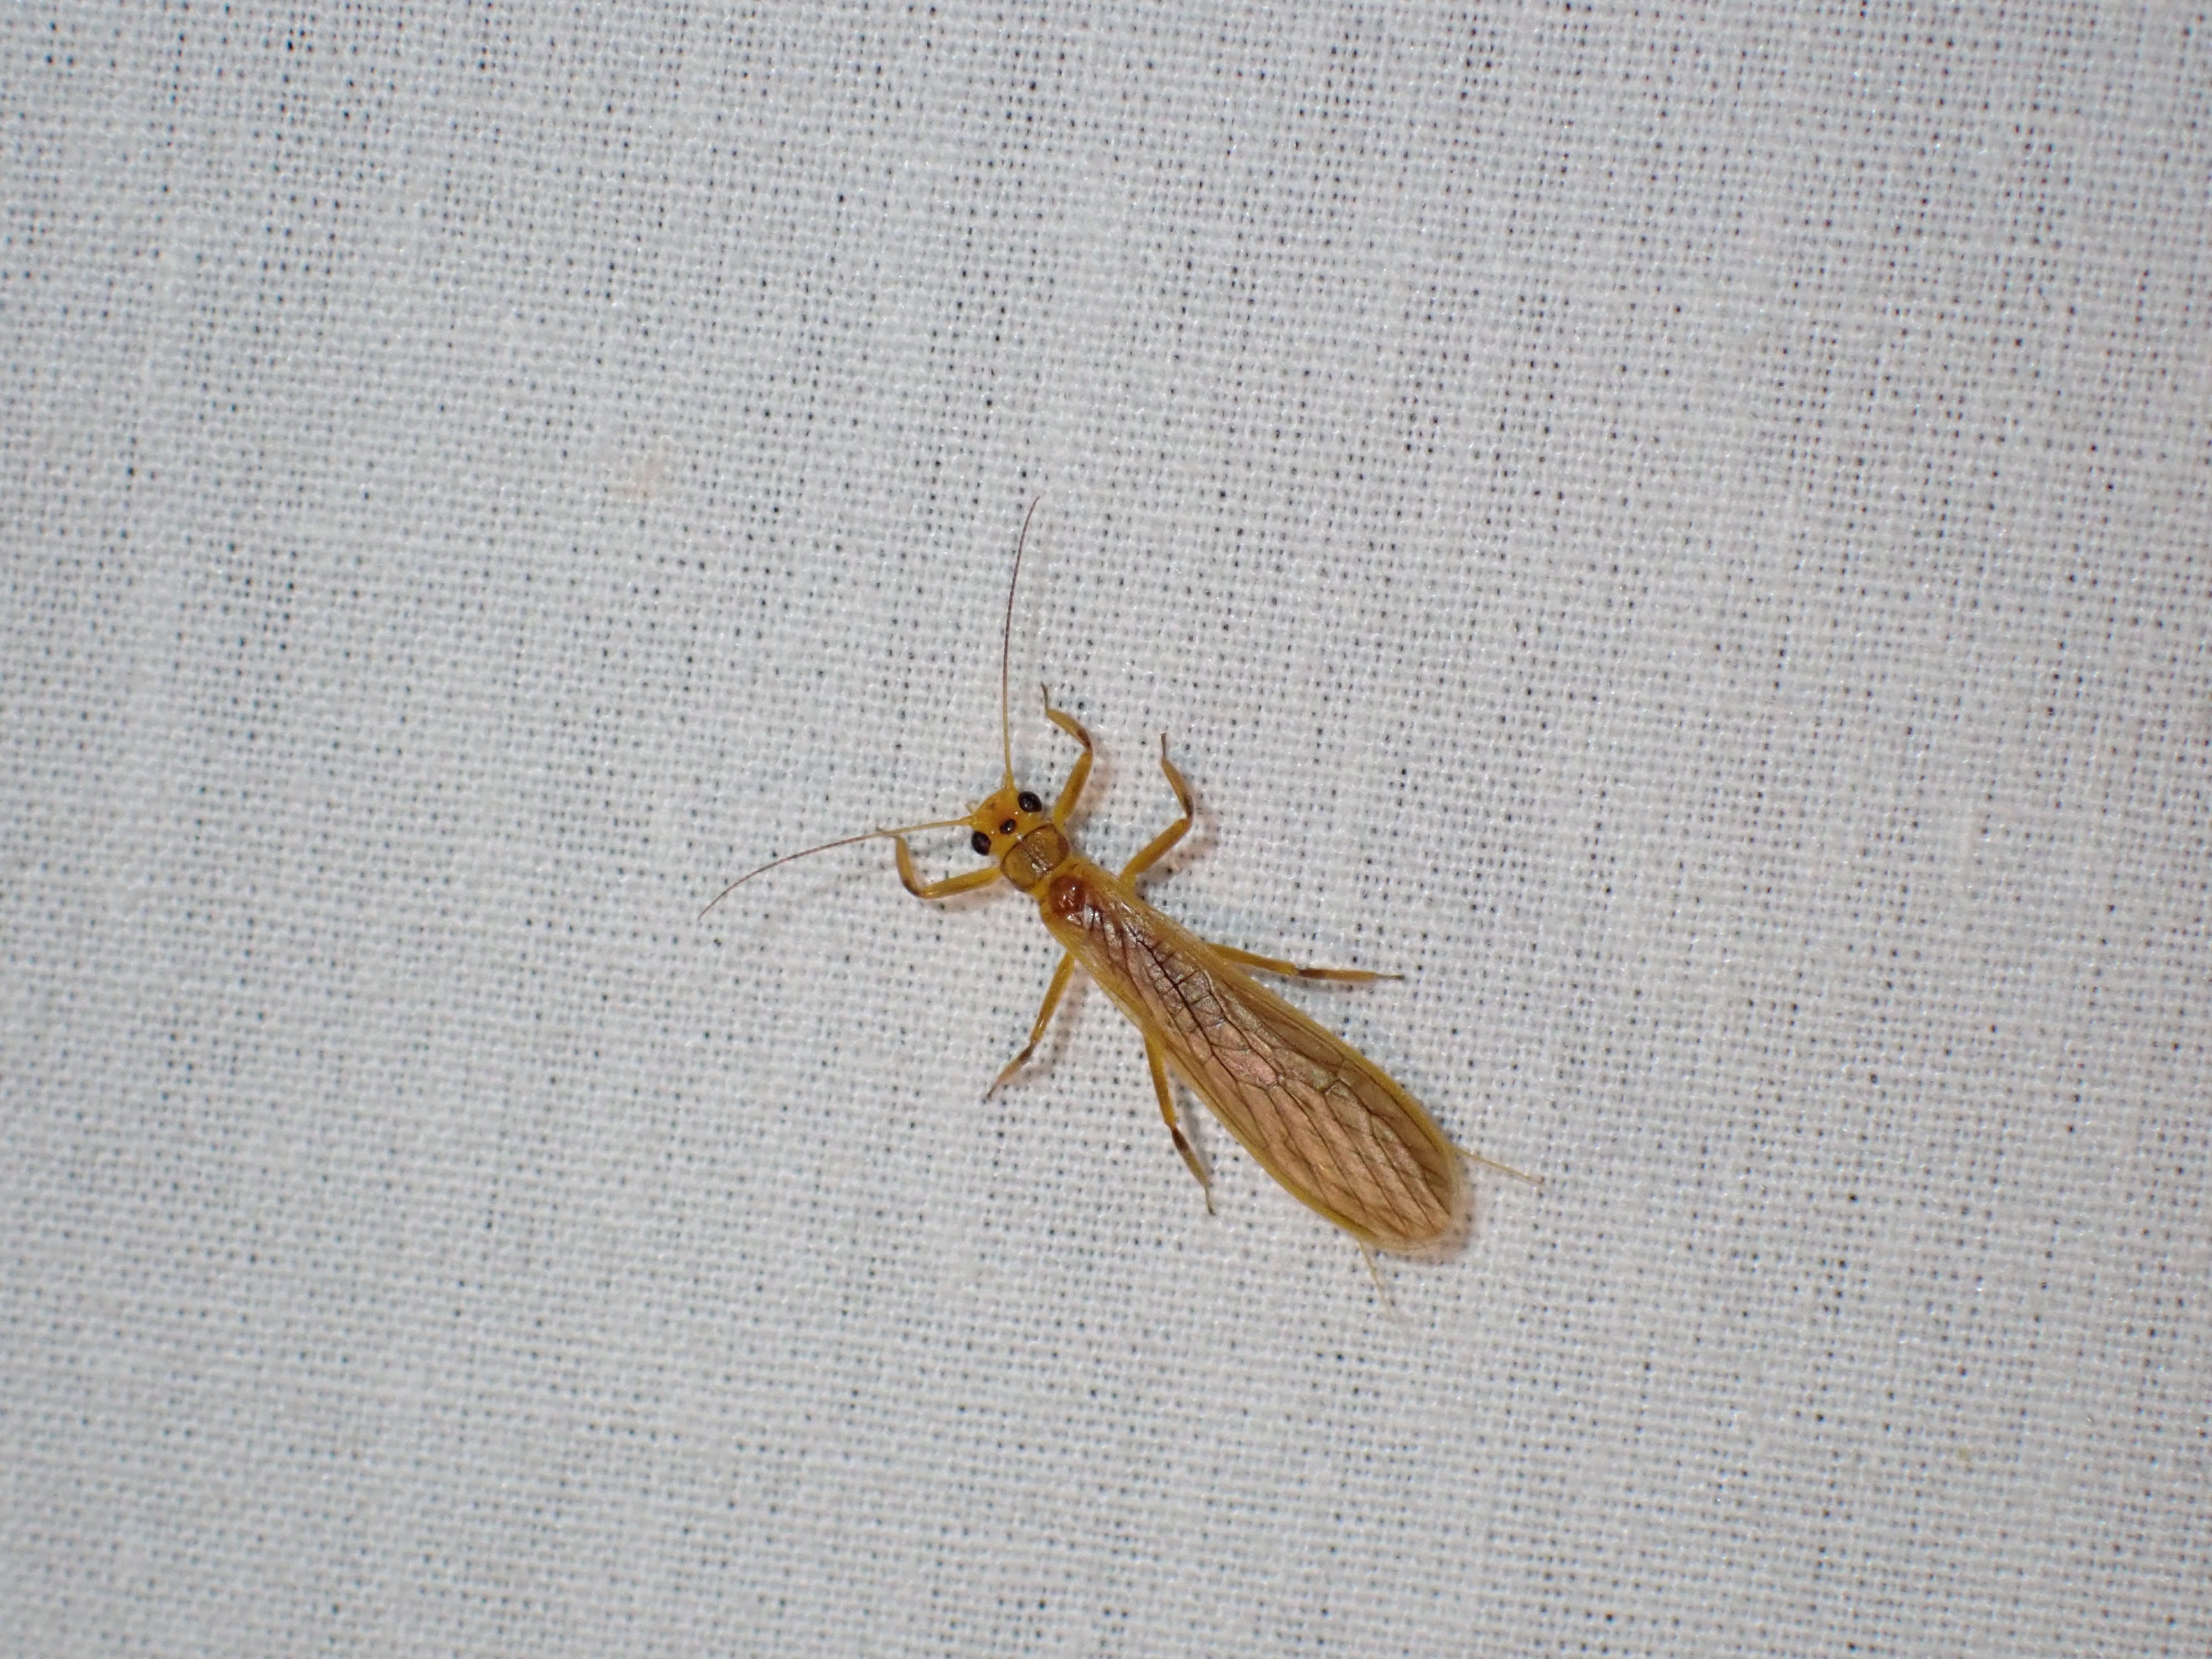 a yellow stonefly on a white sheet.